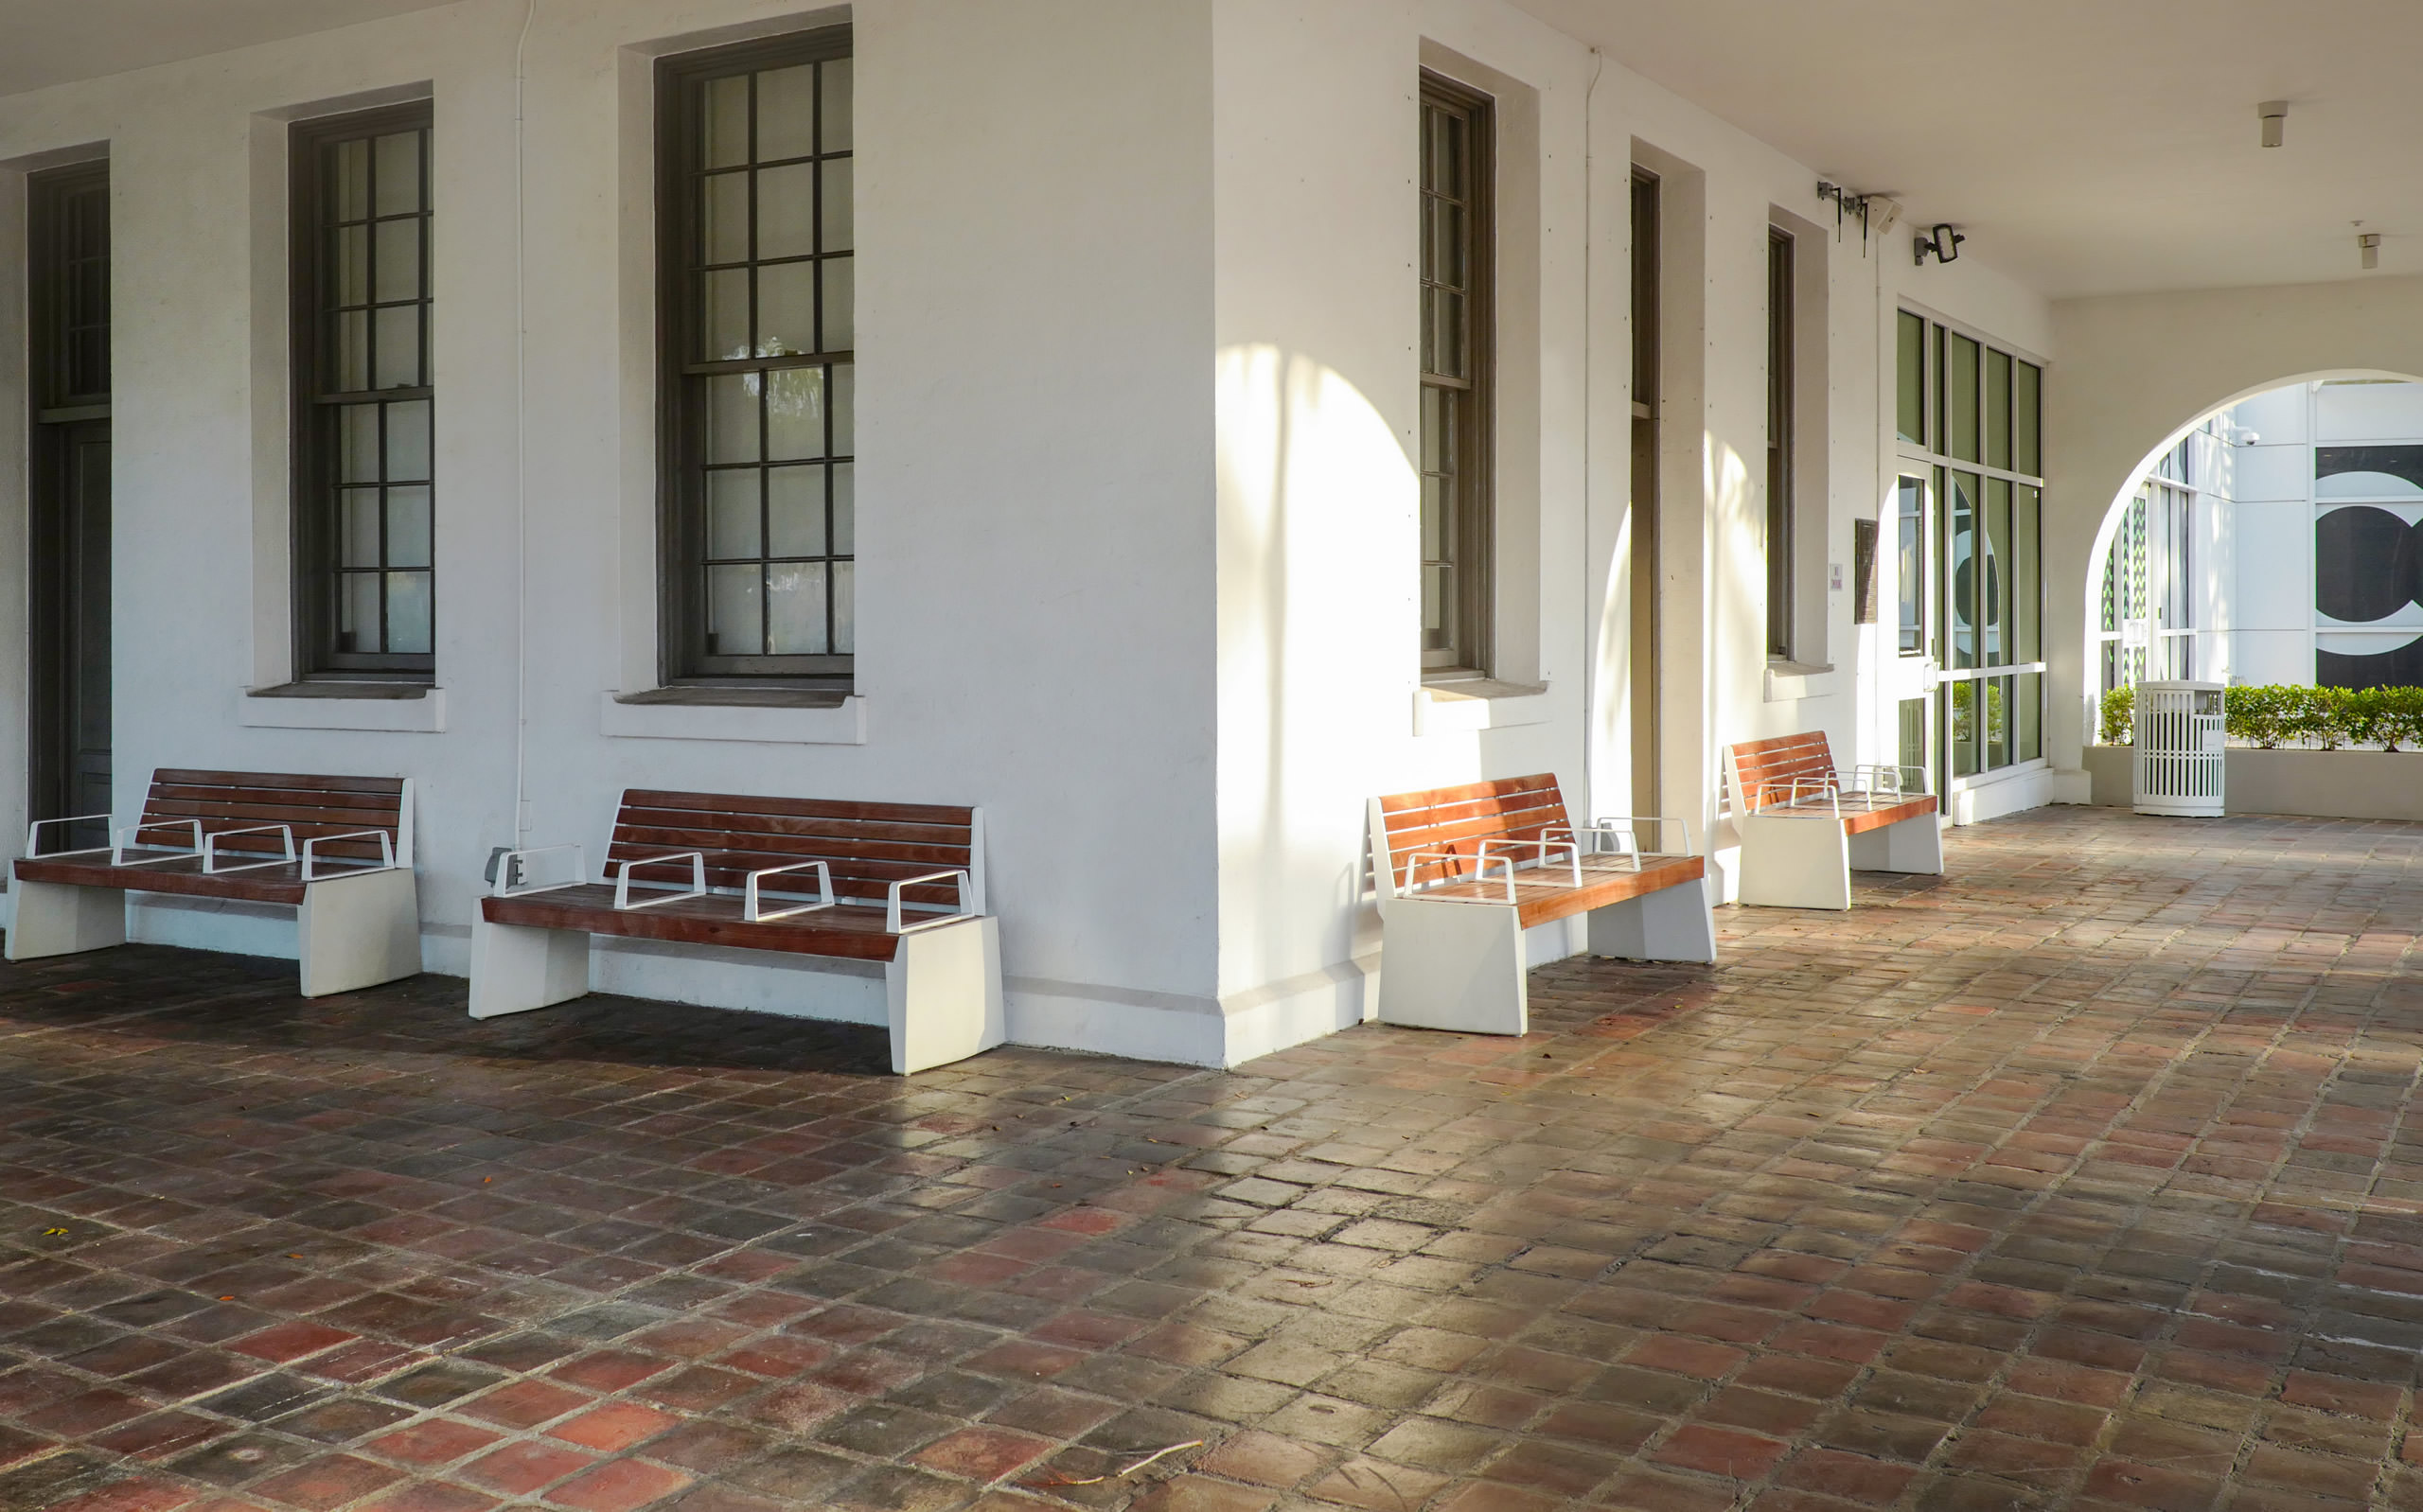 A row of benches in front of a building.